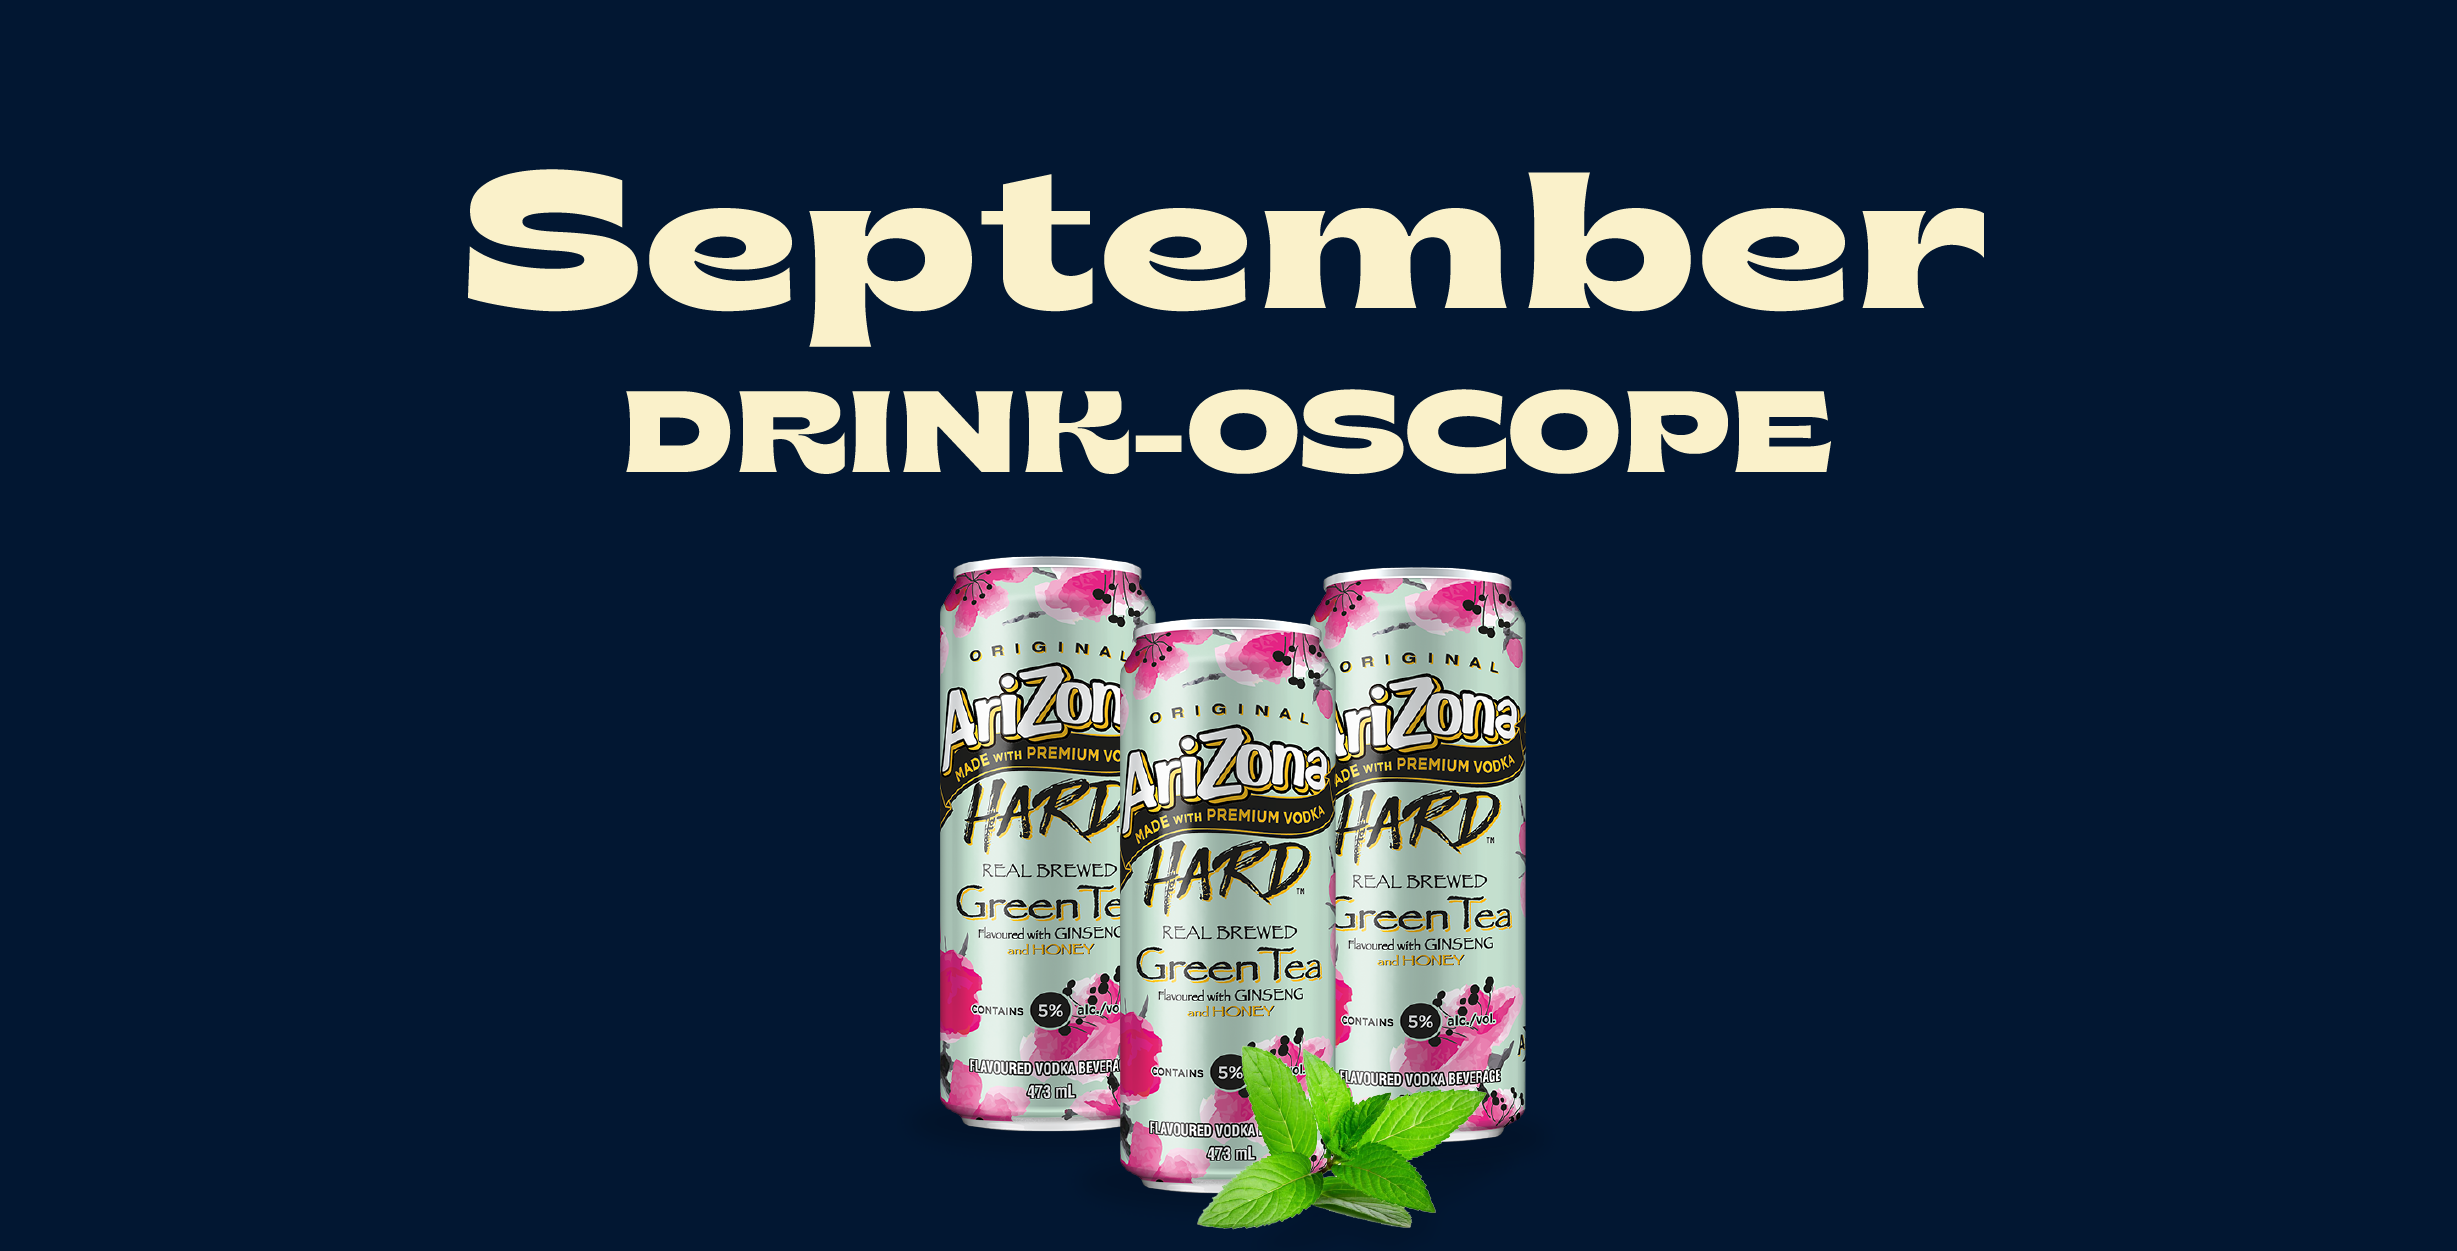 September Drink-oscope: The Best Cocktail for your Star Sign